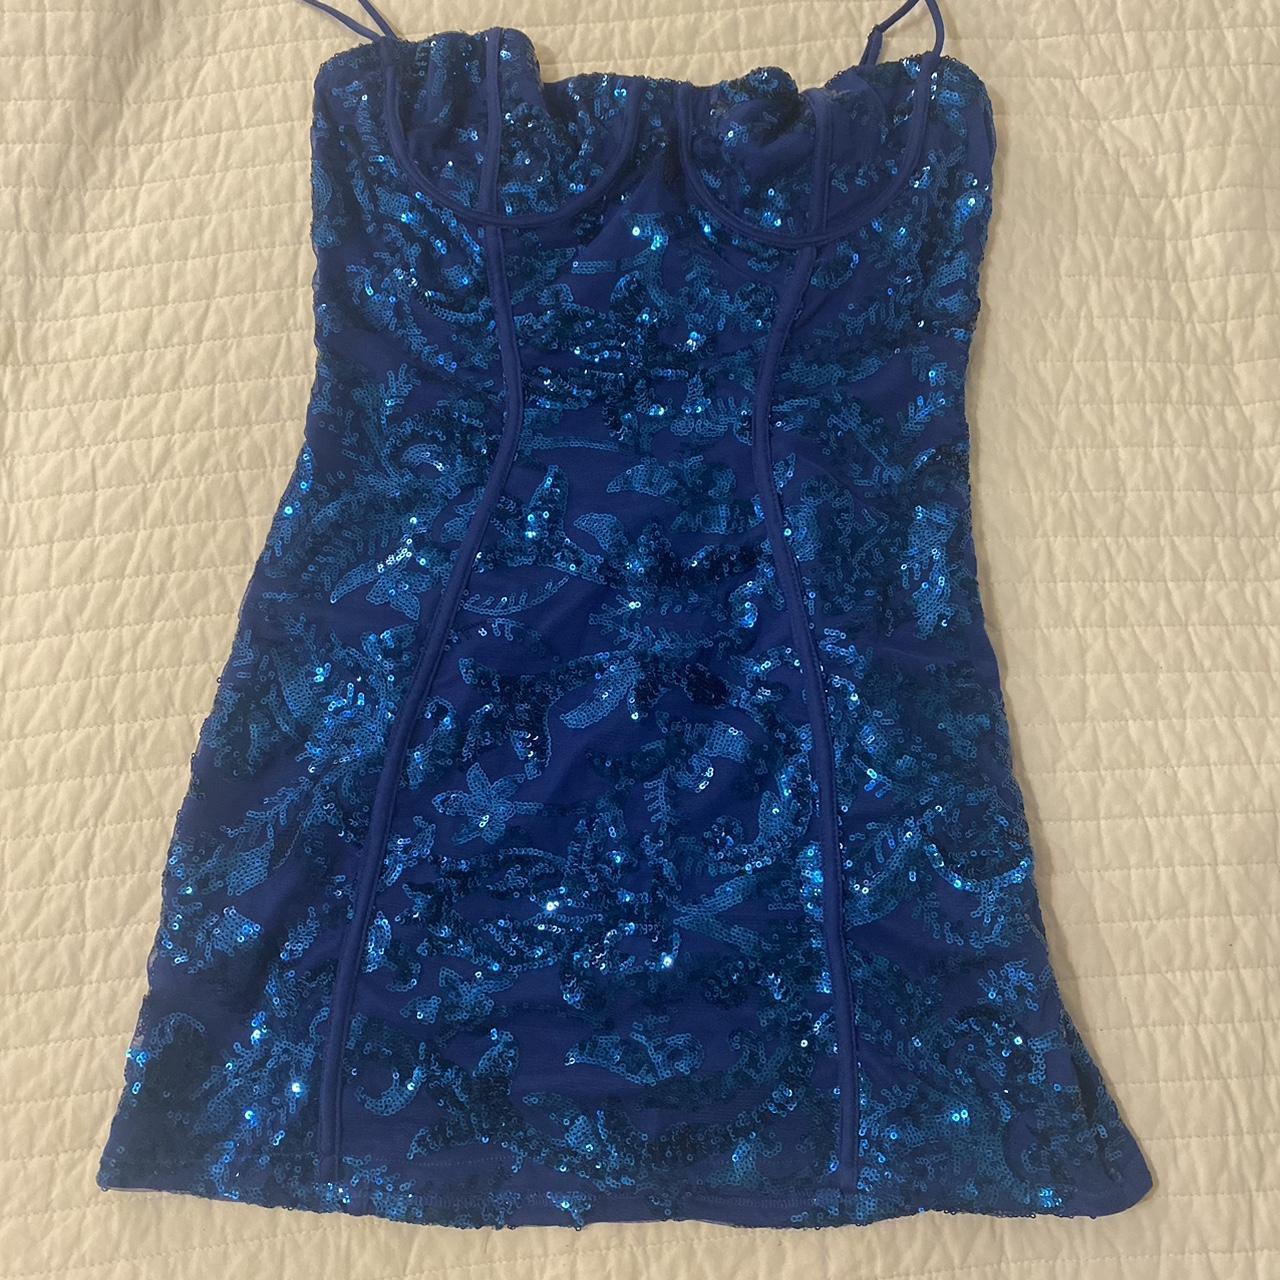 lucy in the sky sequined royal blue dress size large - Depop